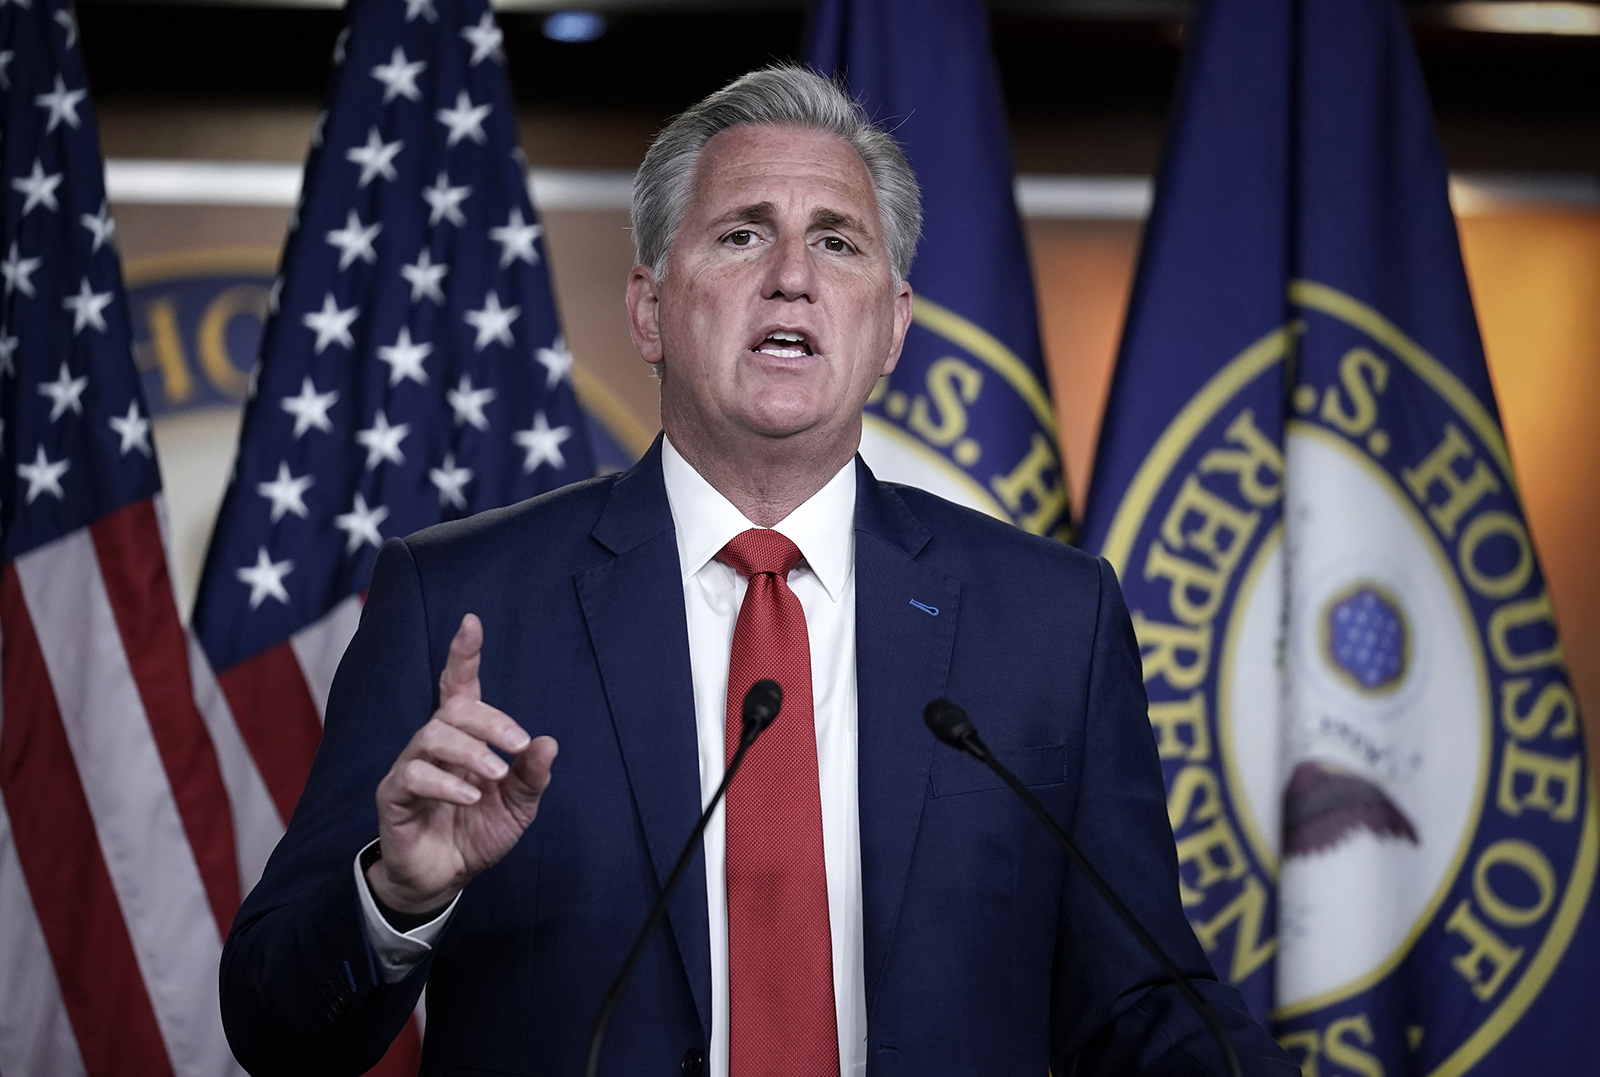 House Minority Leader Kevin McCarthy, R-Calif., gives his assessment of the GOP's performance in the election as he speaks with reporters at the Capitol in Washington, on Wednesday, November 4.